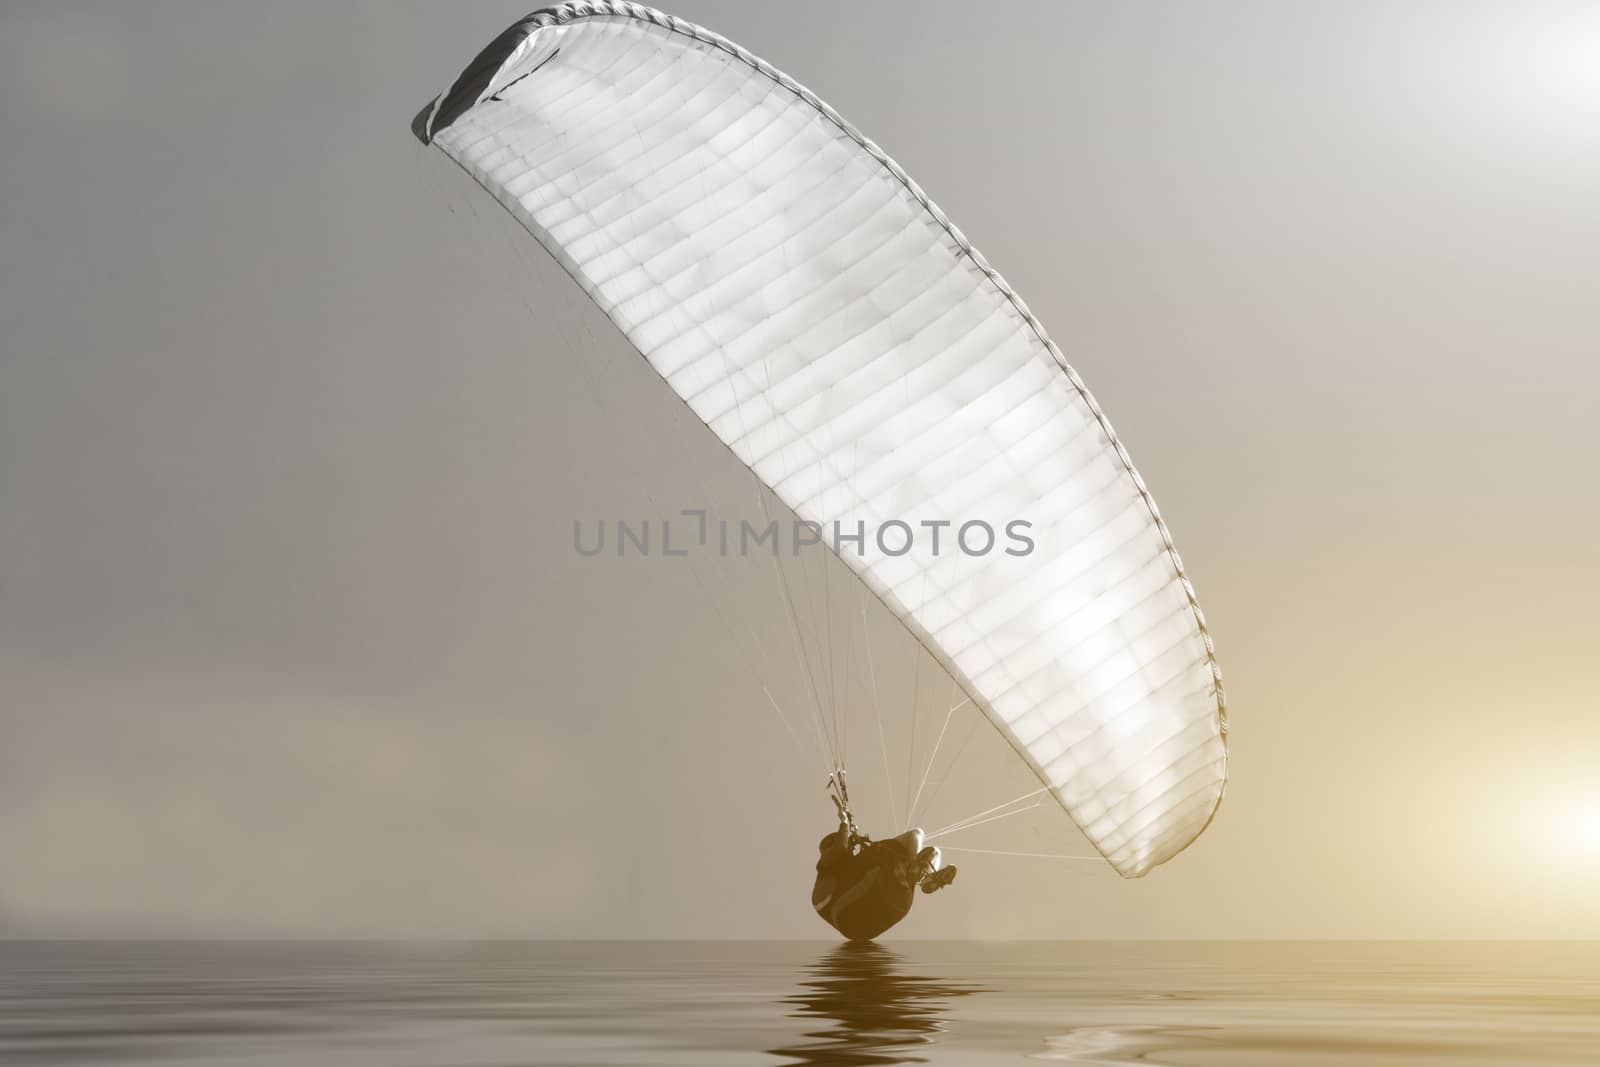 Paraglider in the sunset by Fr@nk